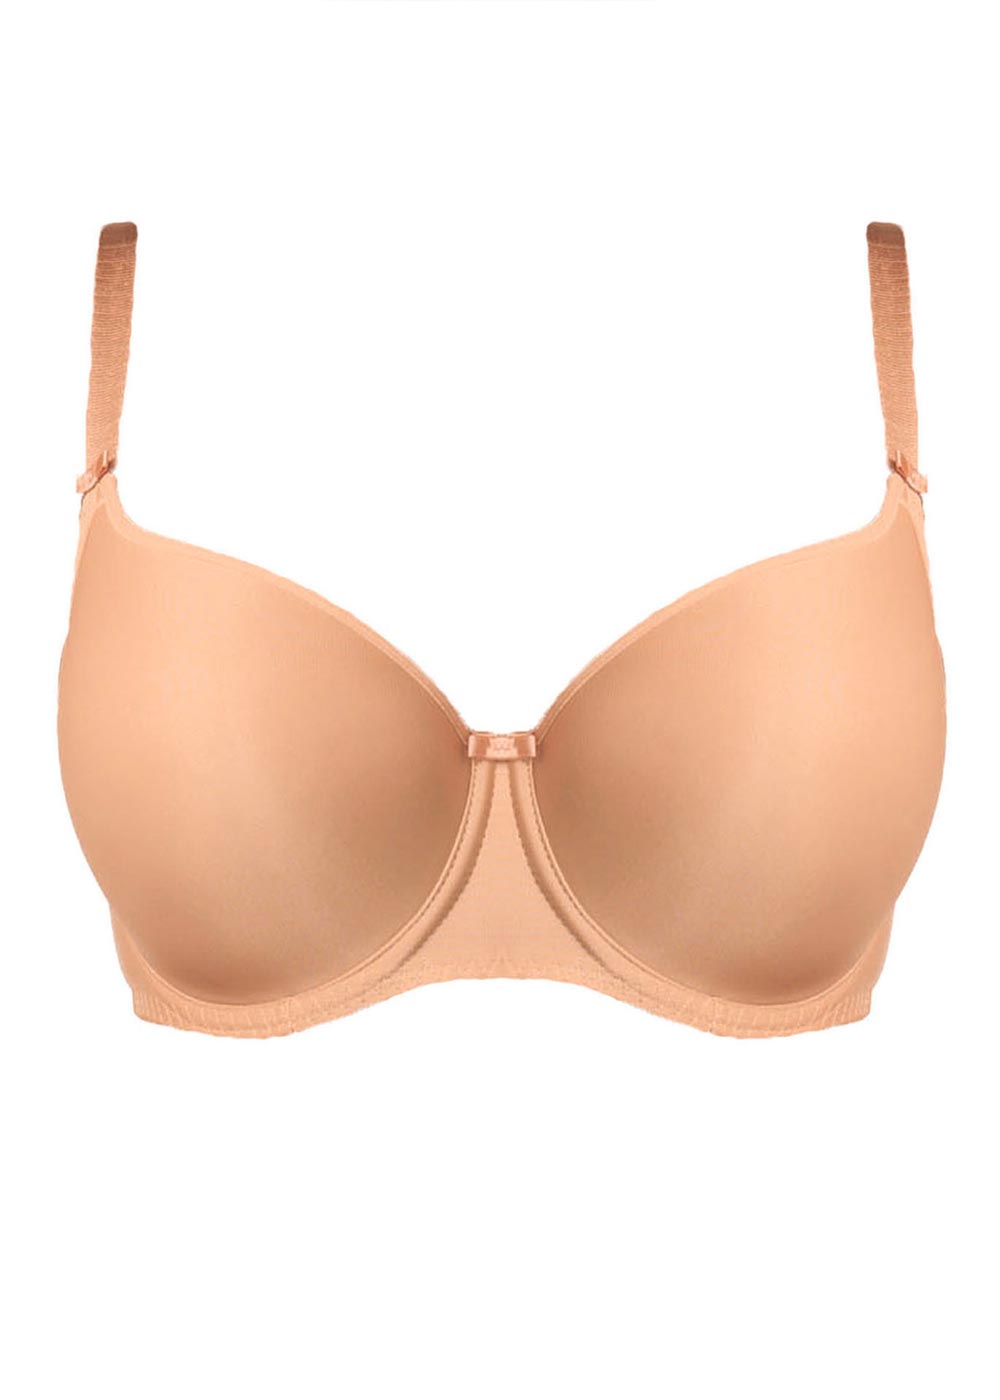 Elomi Smoothing Underwire Foam Molded Strapless Bra, Nude, 40F 